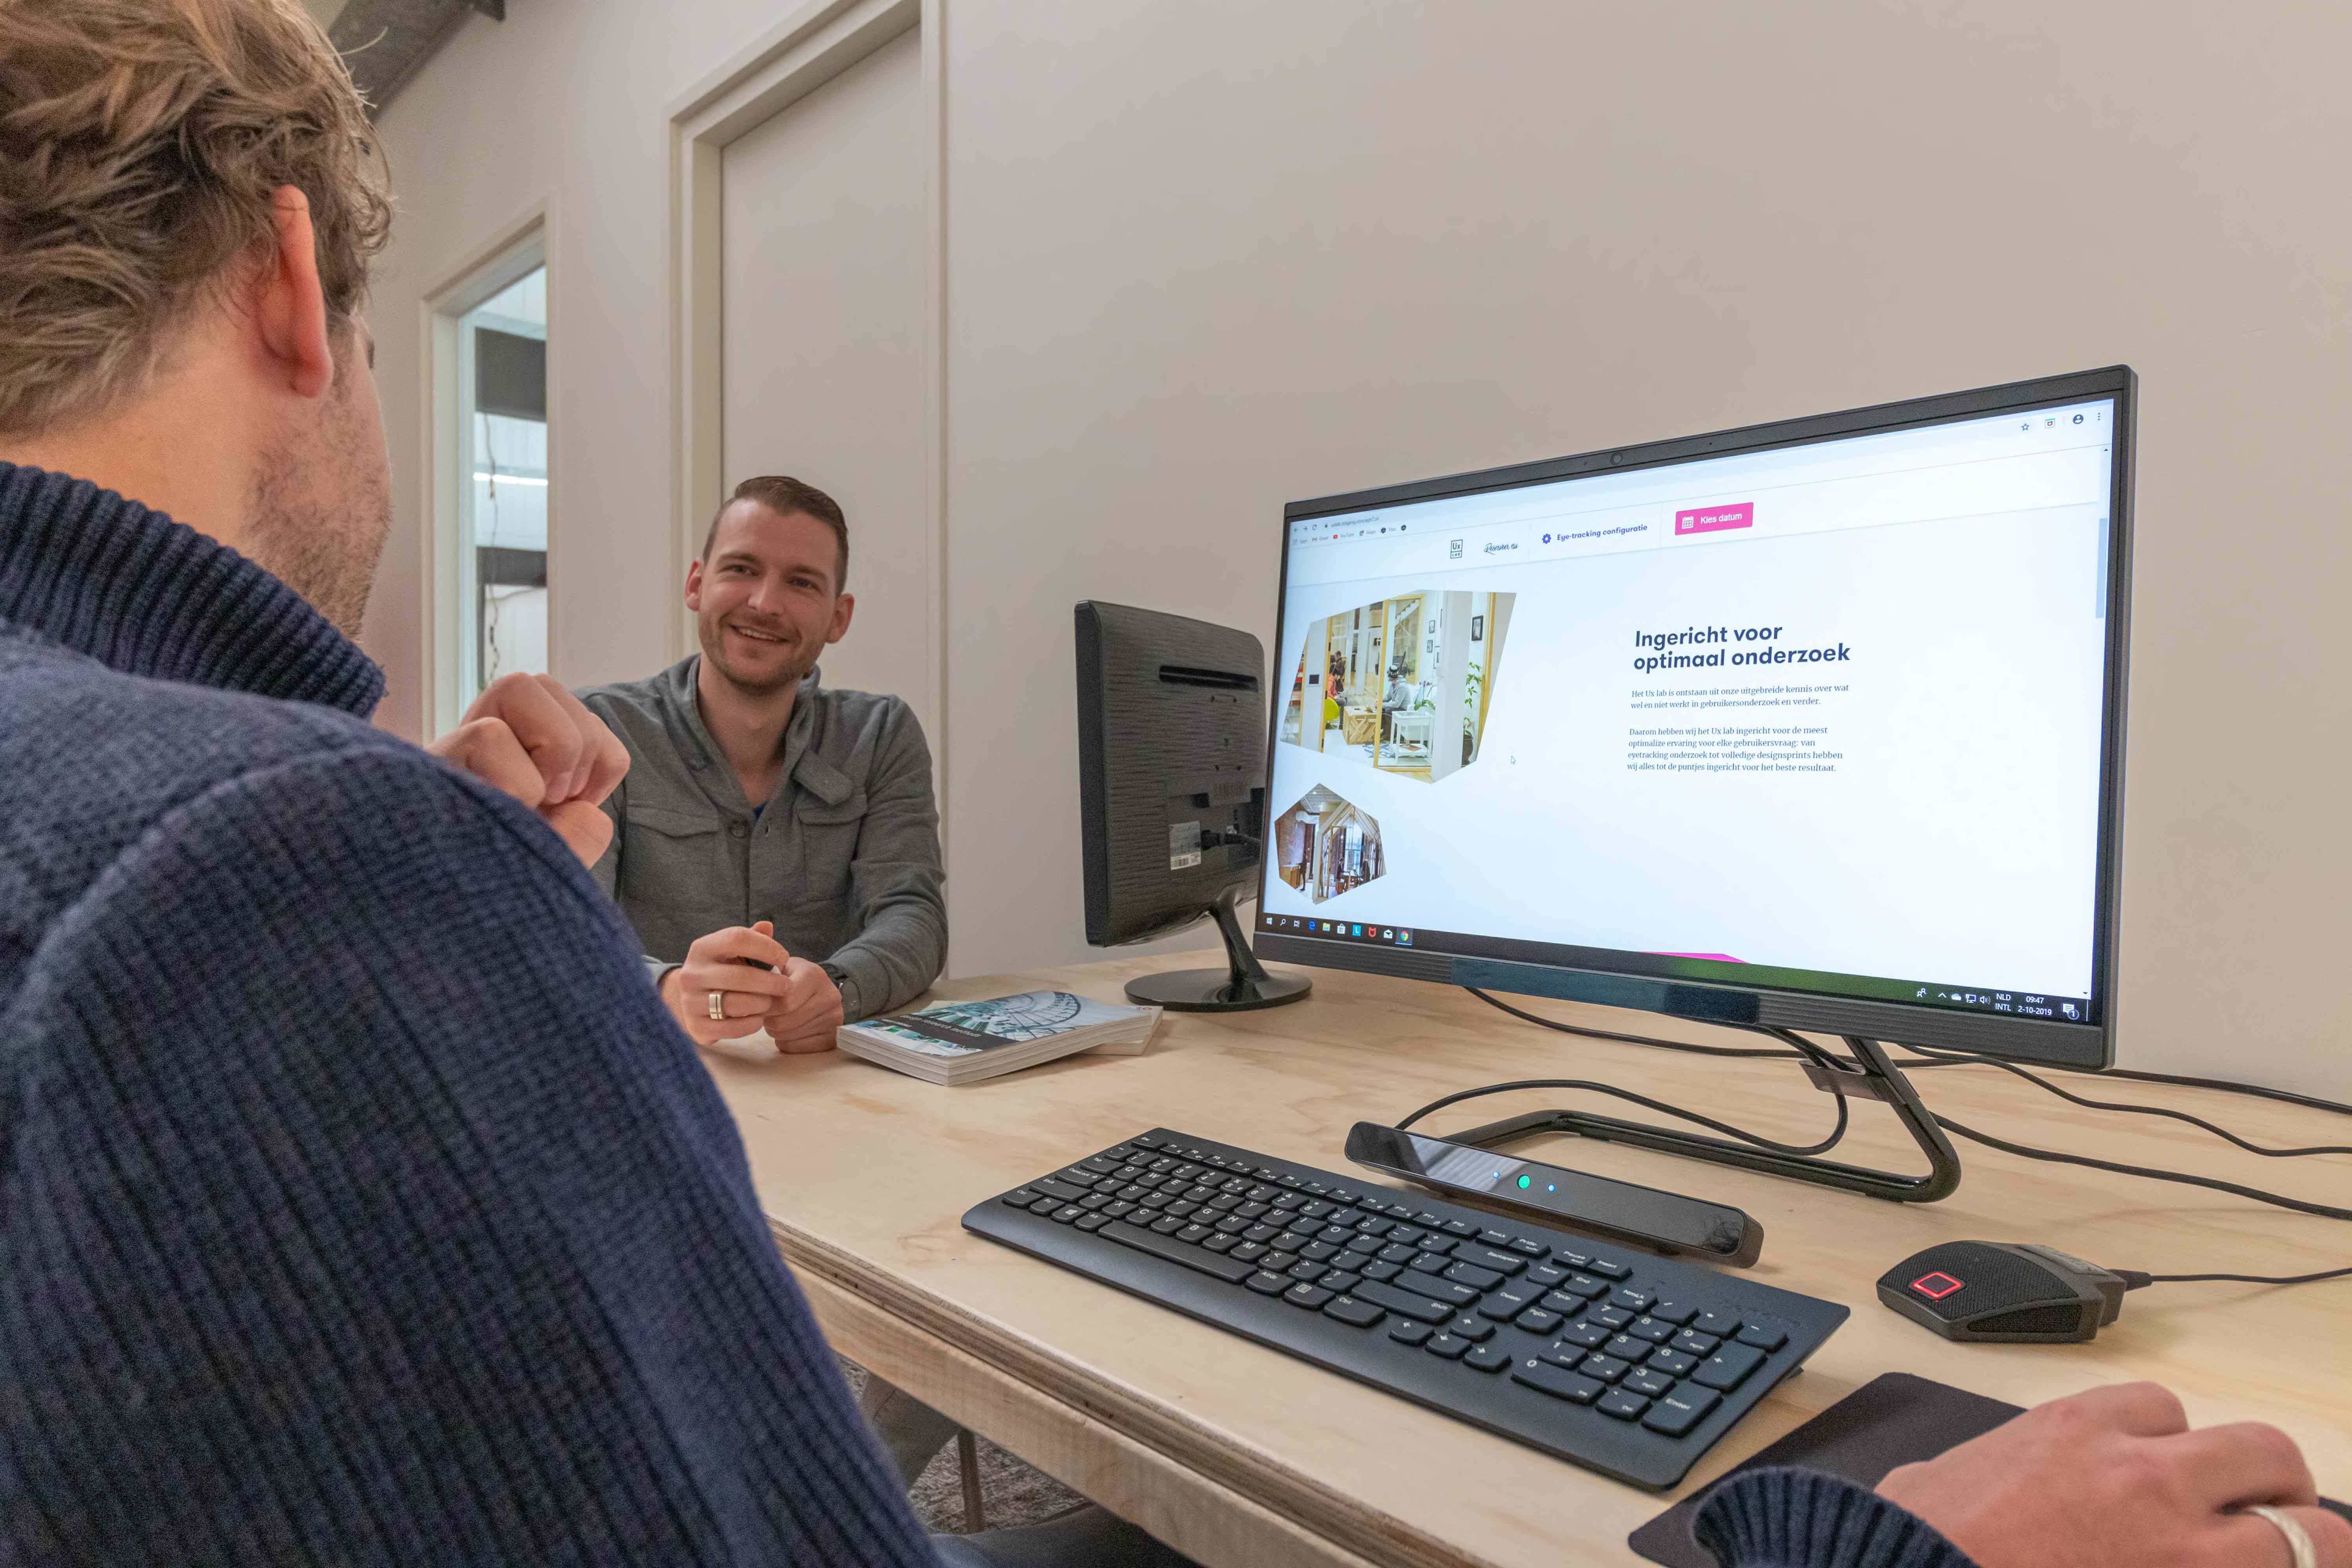 UX lab in Groningen becomes third Happy Labs location